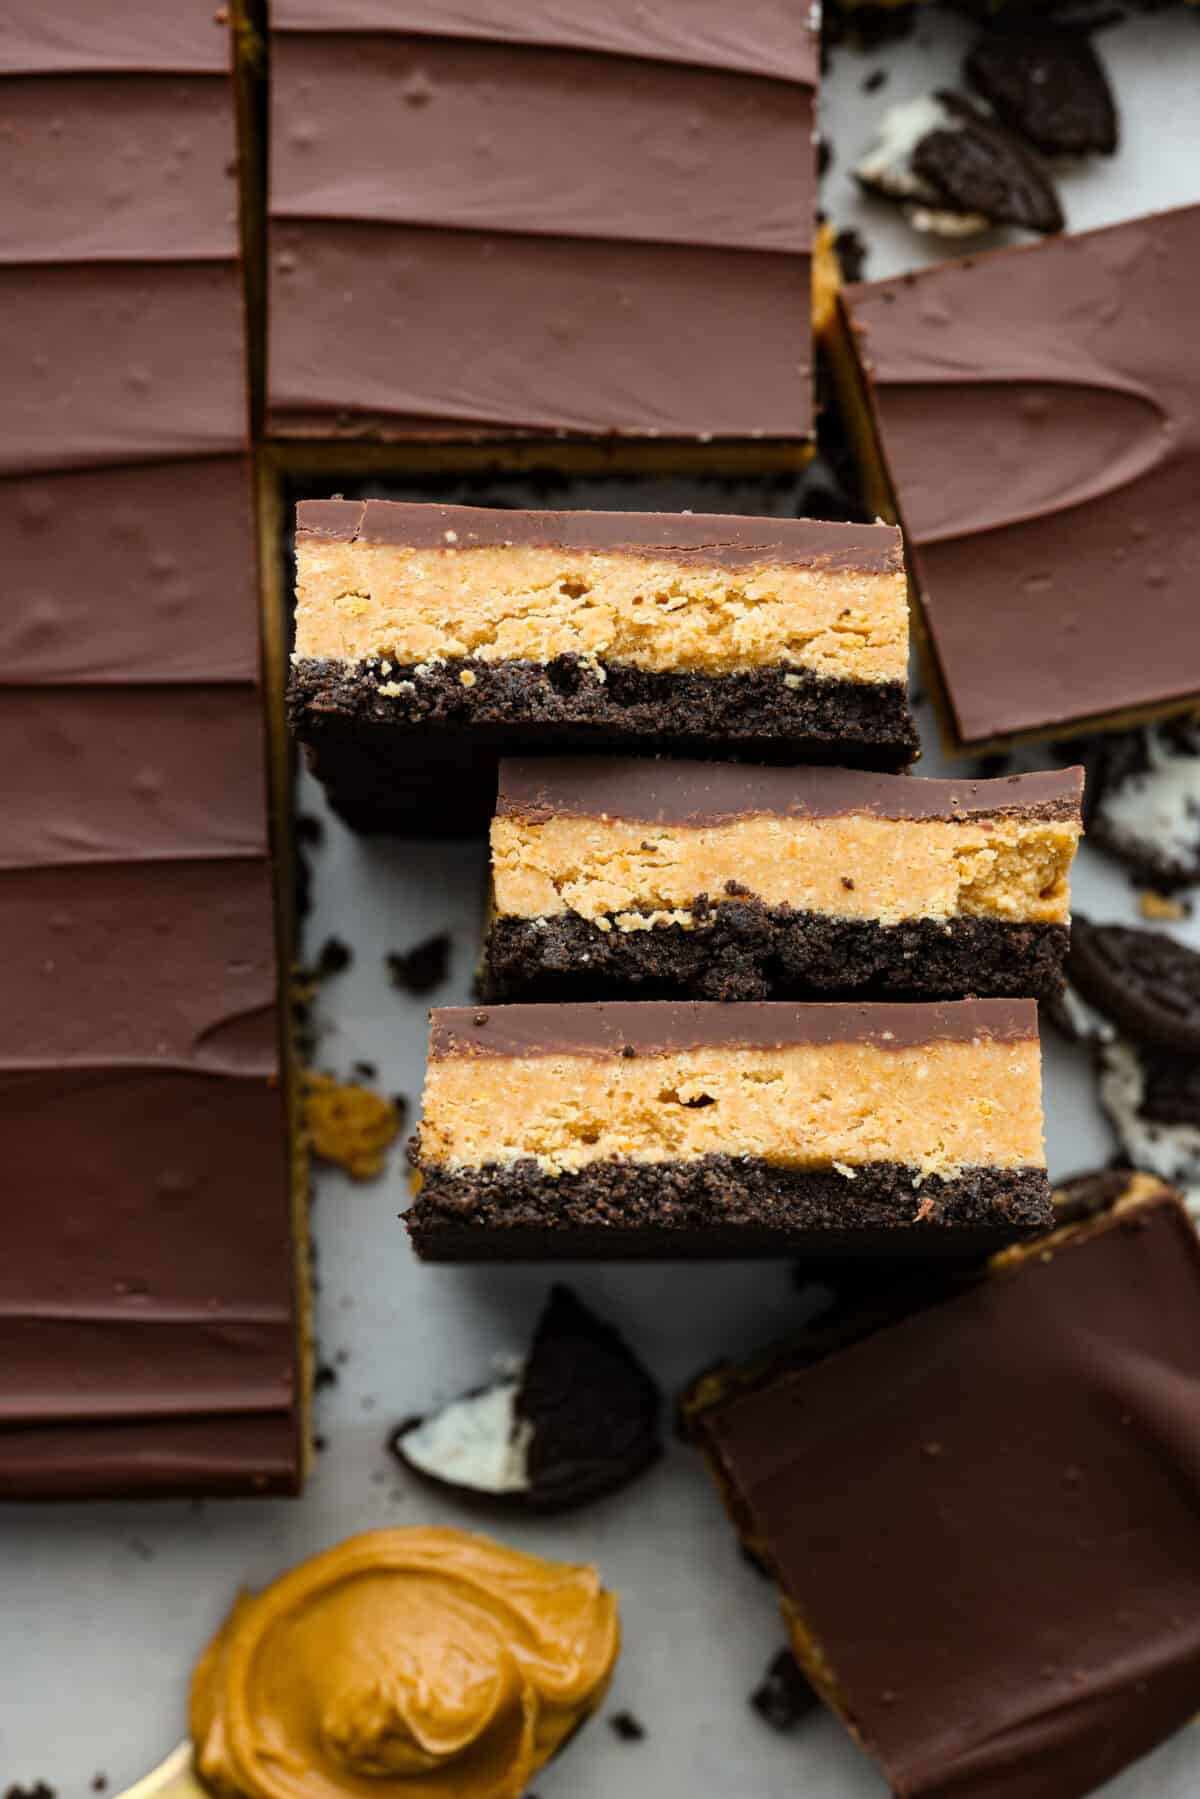 Chocolate peanut butter bars, cut into squares.